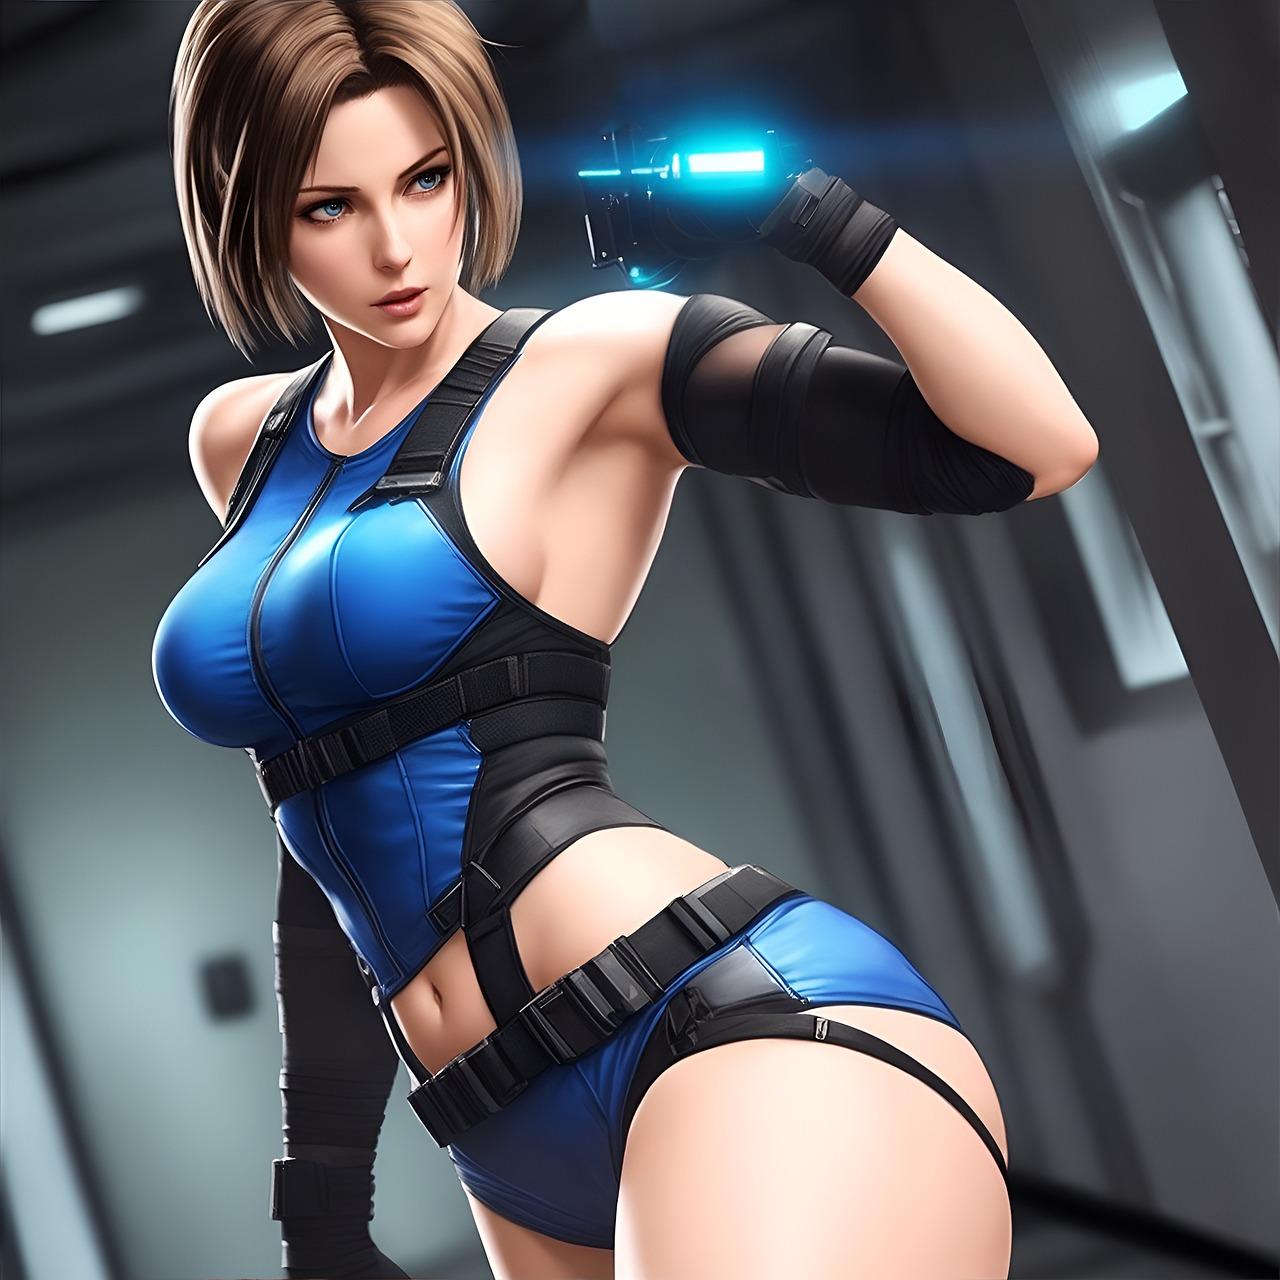 What happened to Jill Valentine?